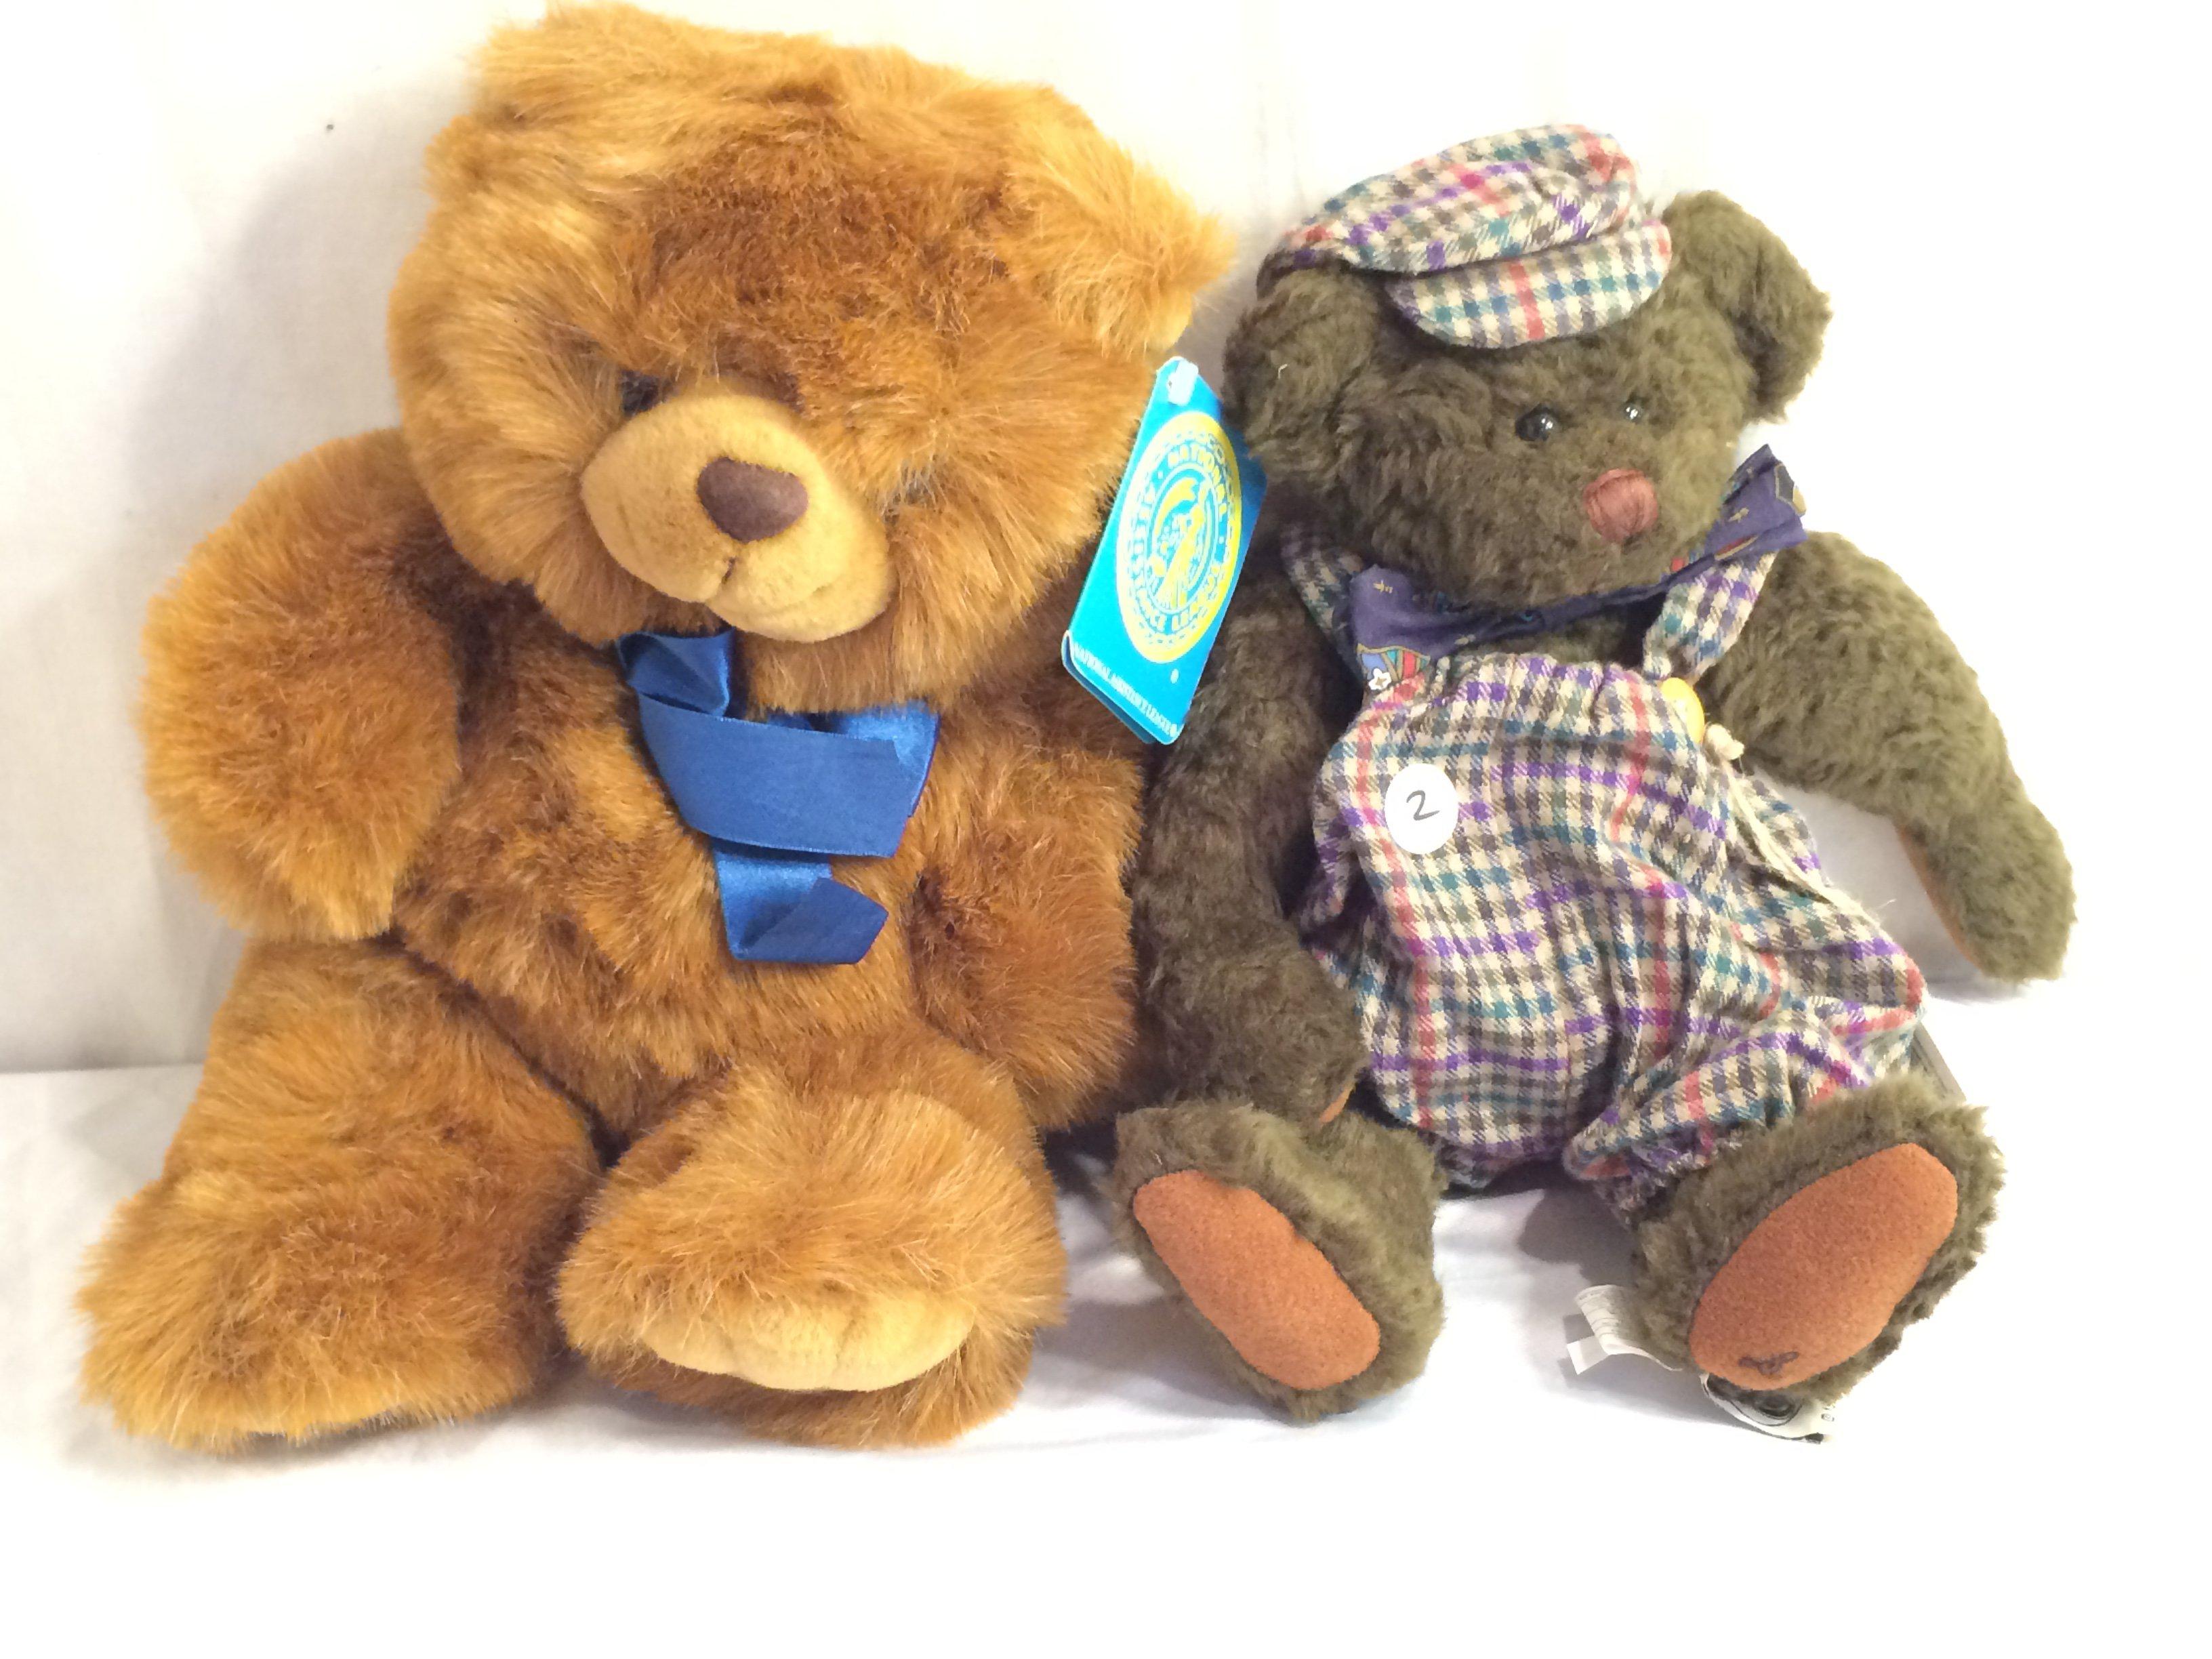 Lot of 2 Collector Cottage Colletcibles Bears Size each:13"tall - See Pictures